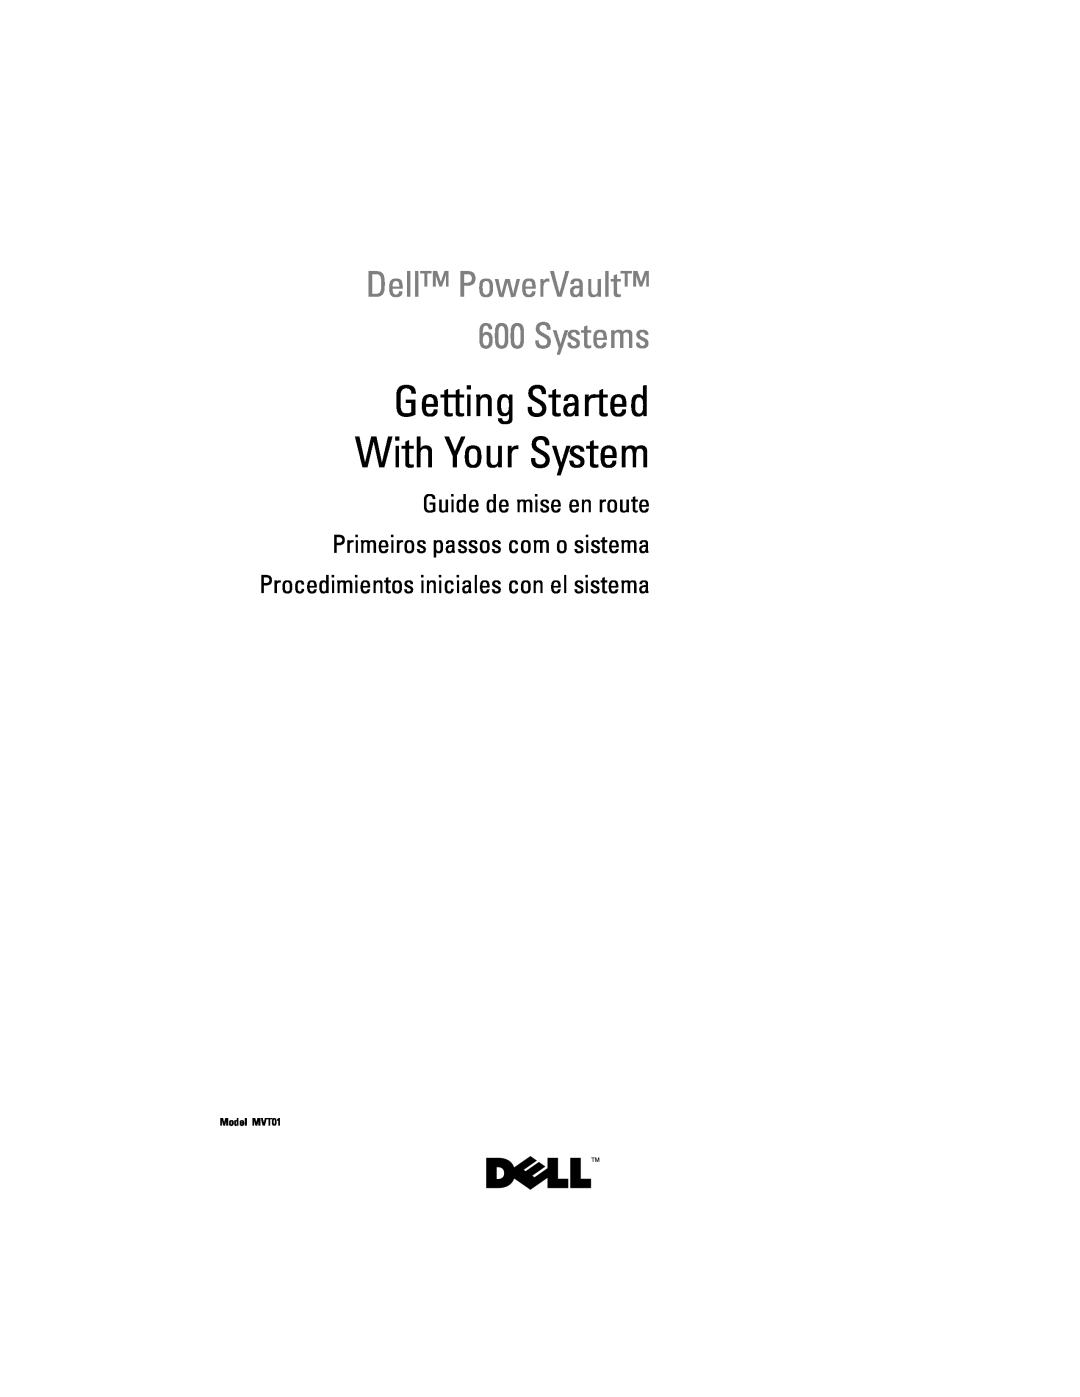 Dell CX193 manual Getting Started With Your System, Dell PowerVault 600 Systems, Procedimientos iniciales con el sistema 